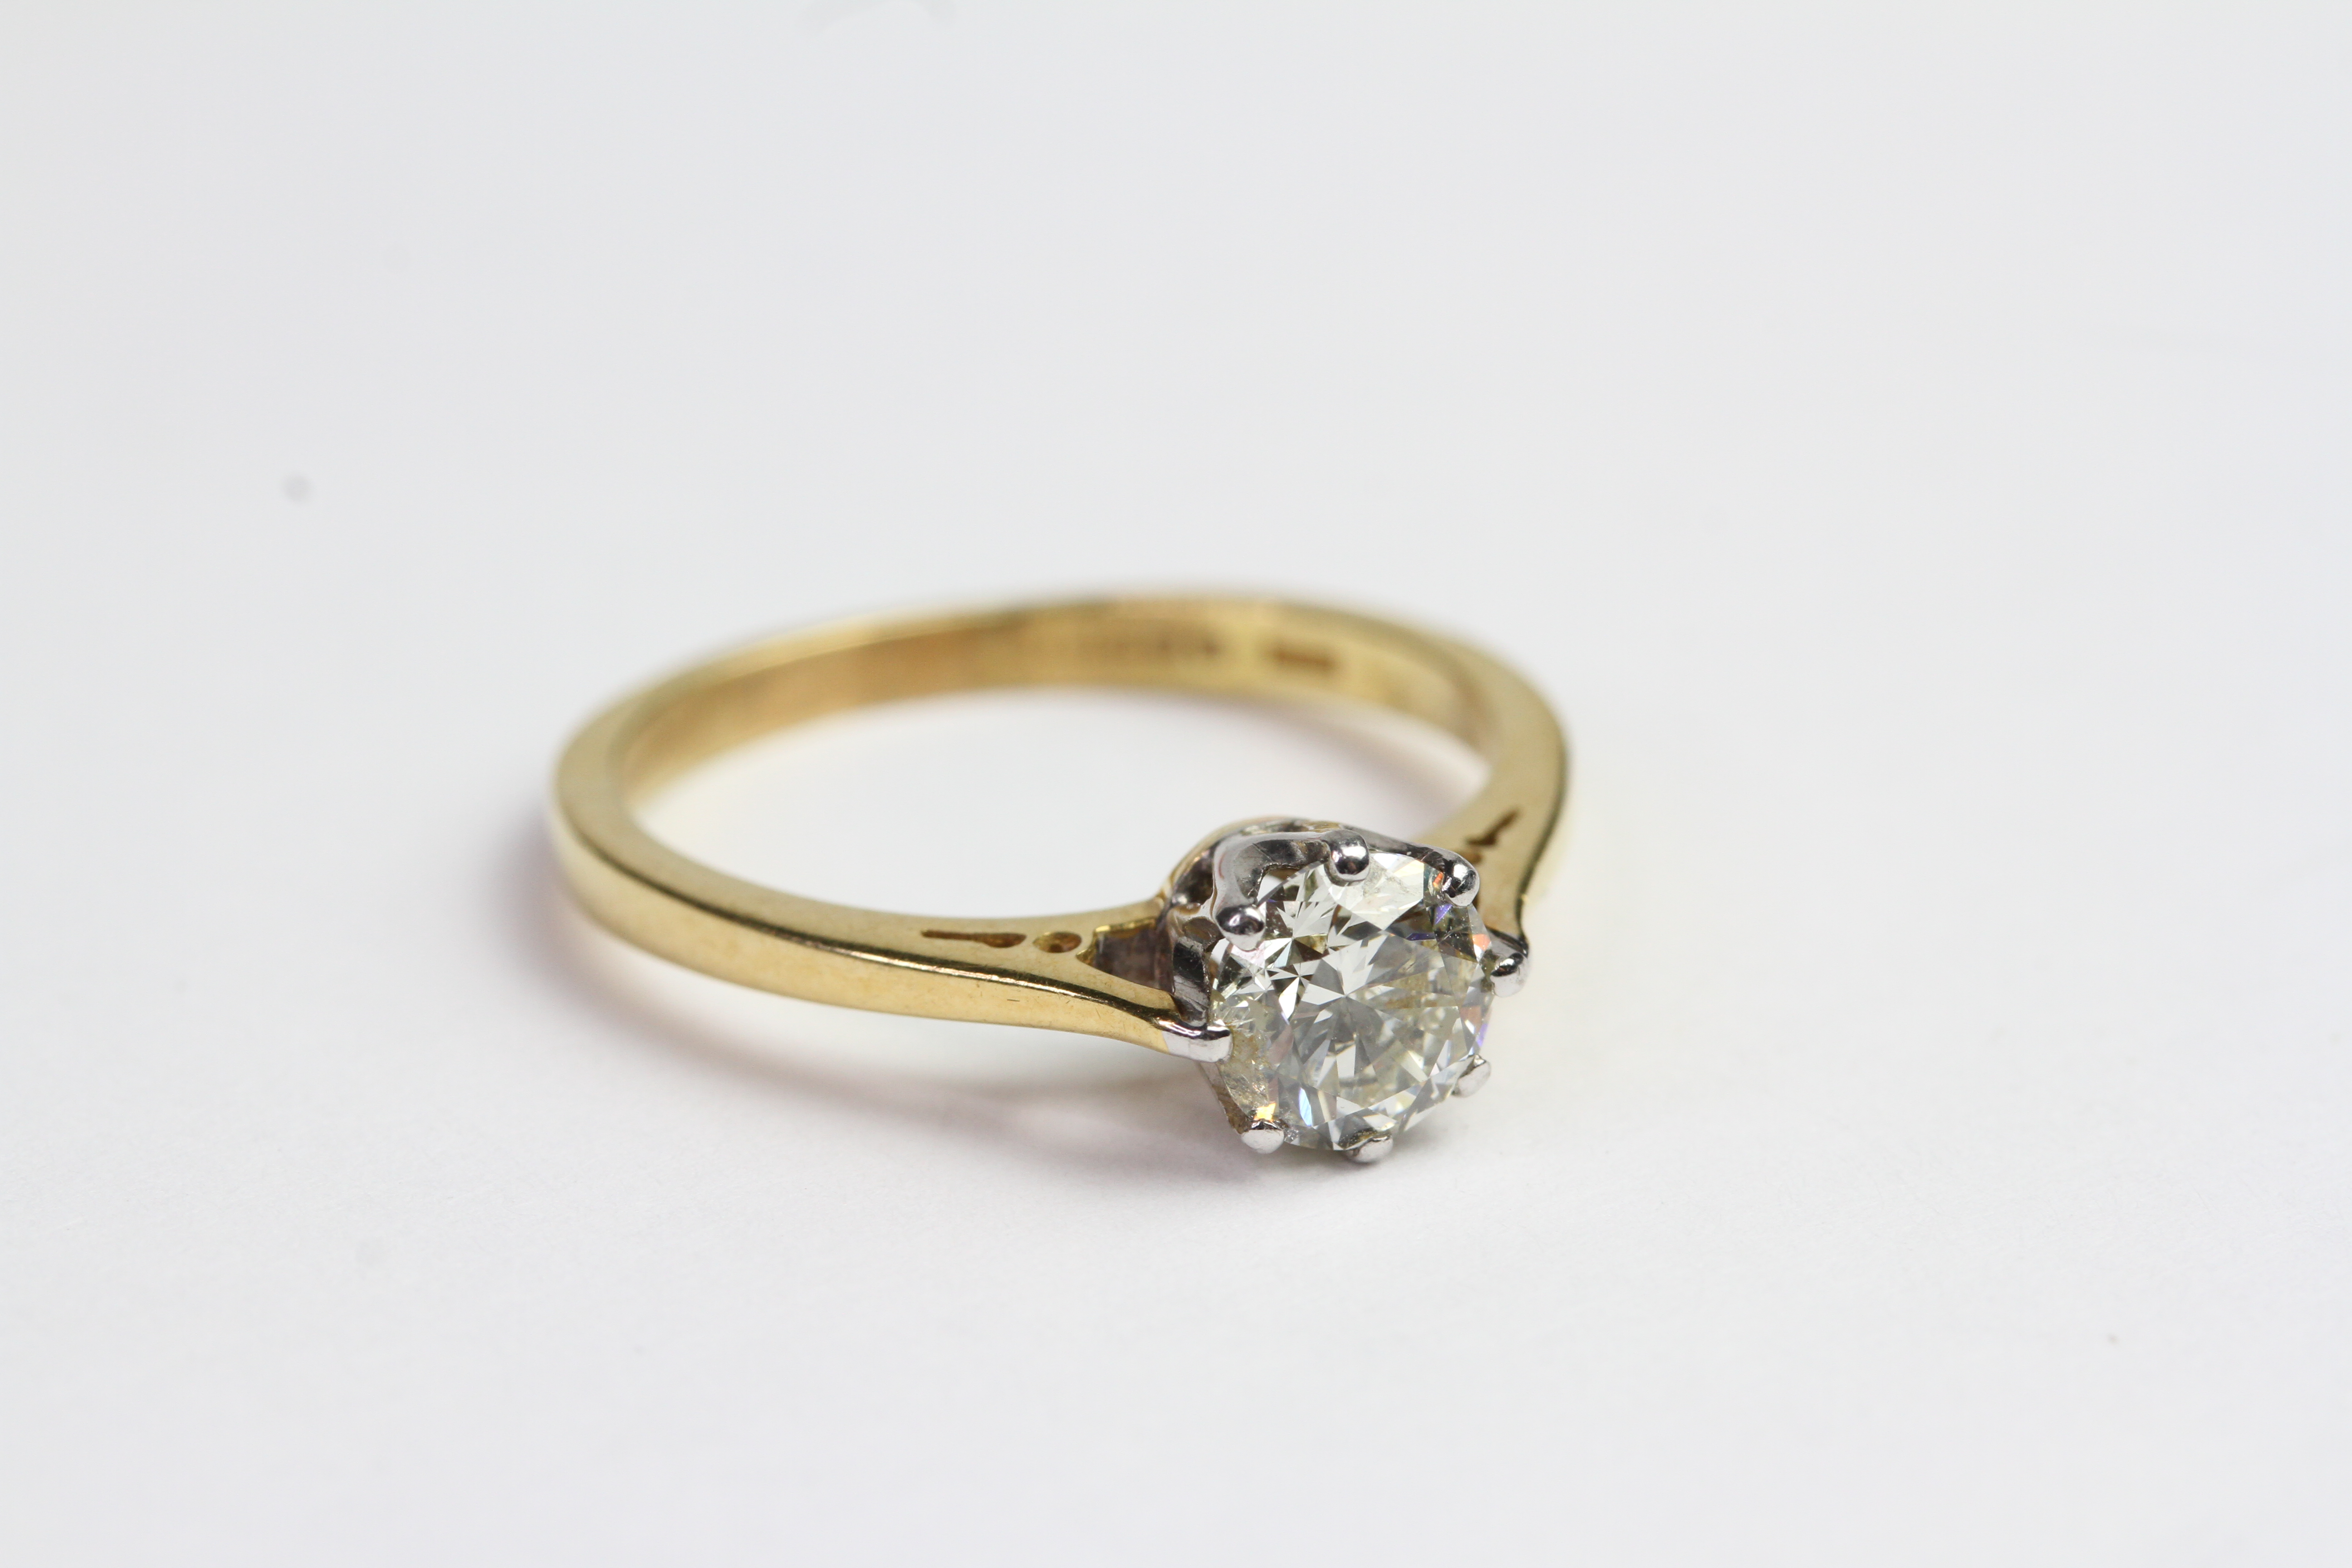 18ct with White Gold setting, Round brilliant diamond solitaire ring D Est 0.50ct - Image 2 of 2